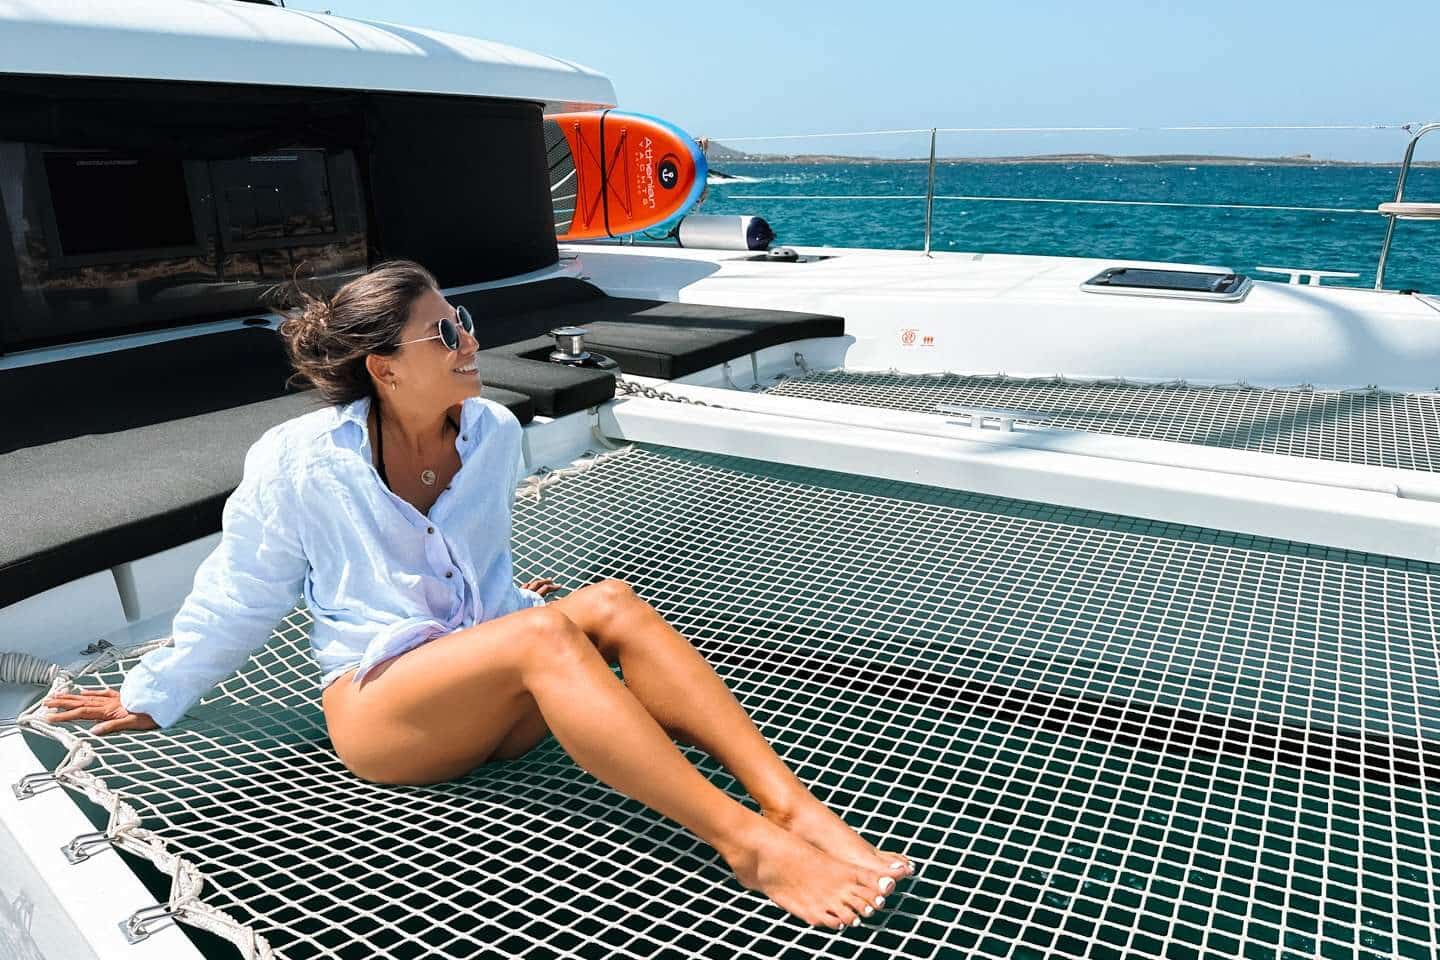 Anna relaxing on the yacht